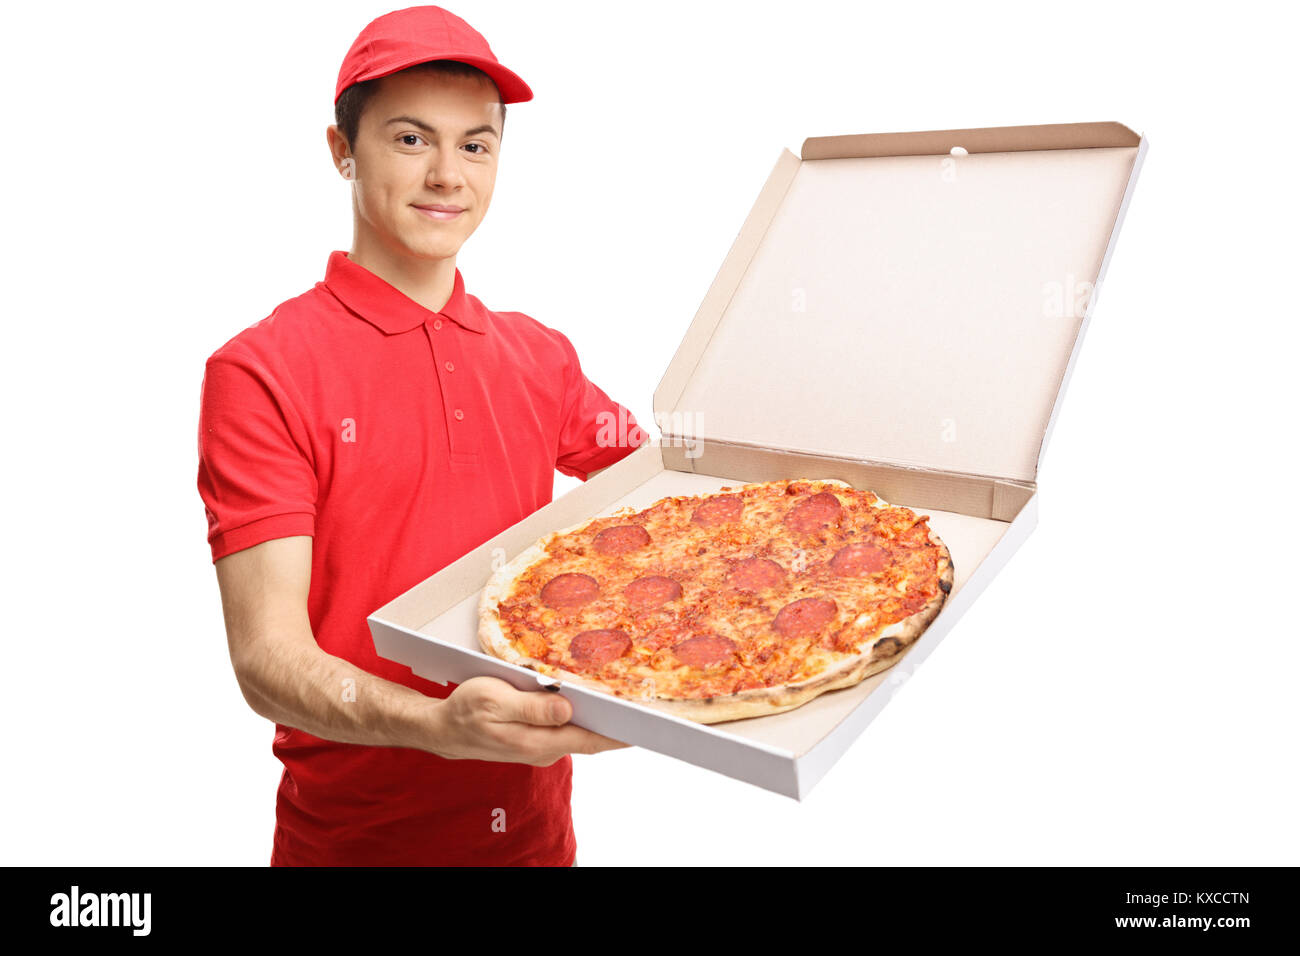 Teenage pizza delivery boy showing a pizza inside a box isolated on white background Stock Photo